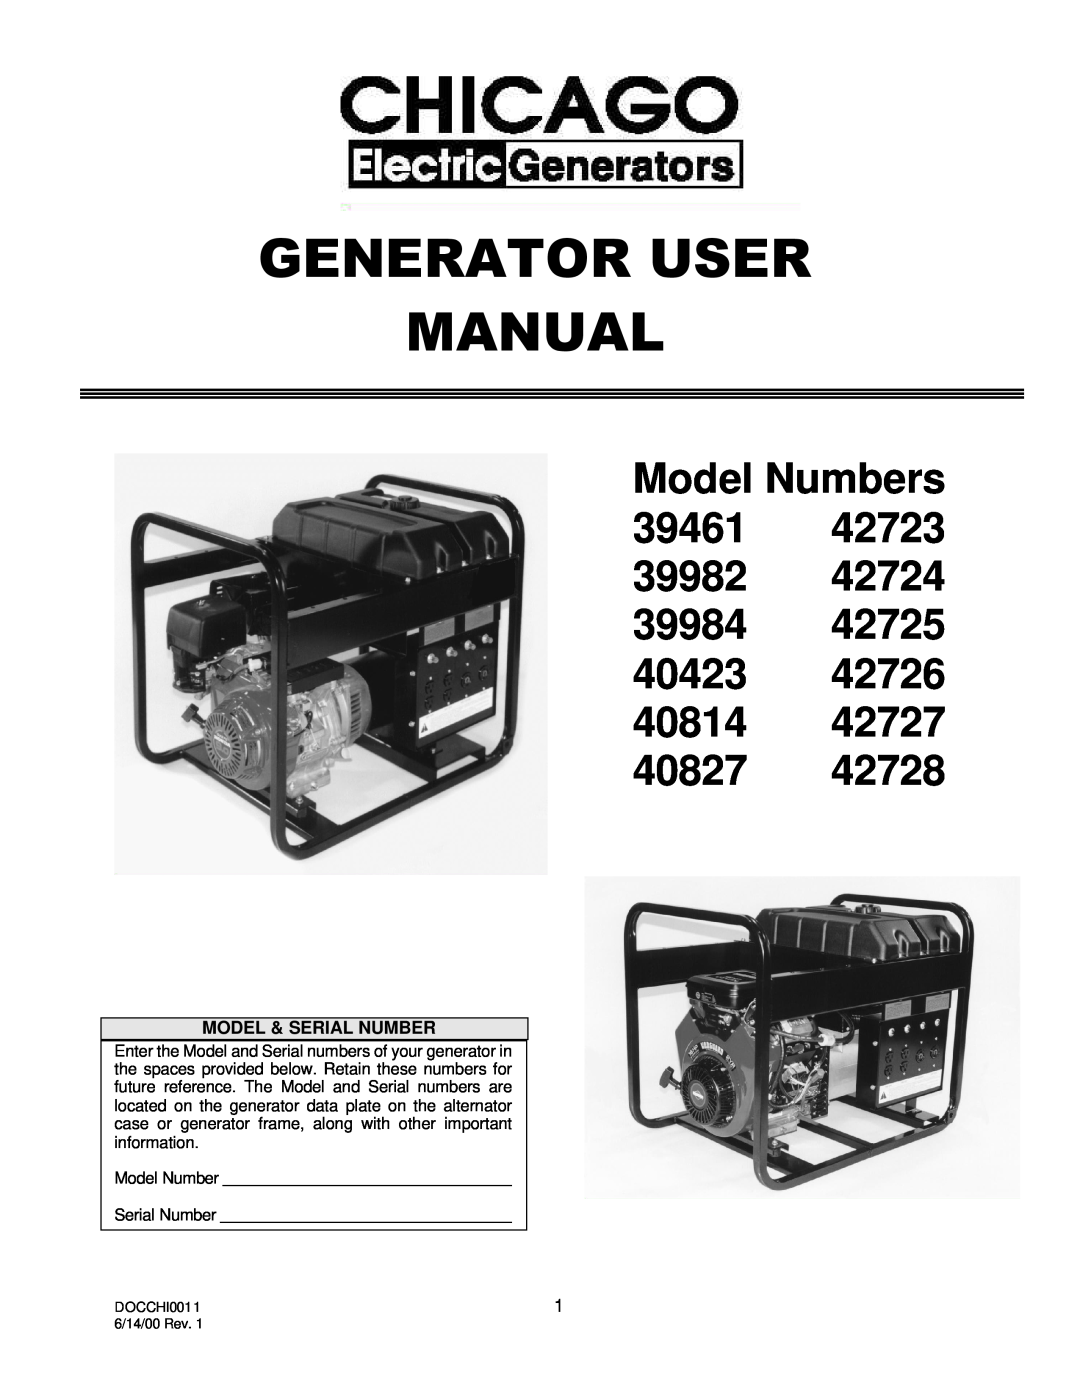 Chicago Electric 40814, 42727, 42723, 42724, 42725 user manual Model & Serial Number, Model Numbers 39461 39982 39984 40423 